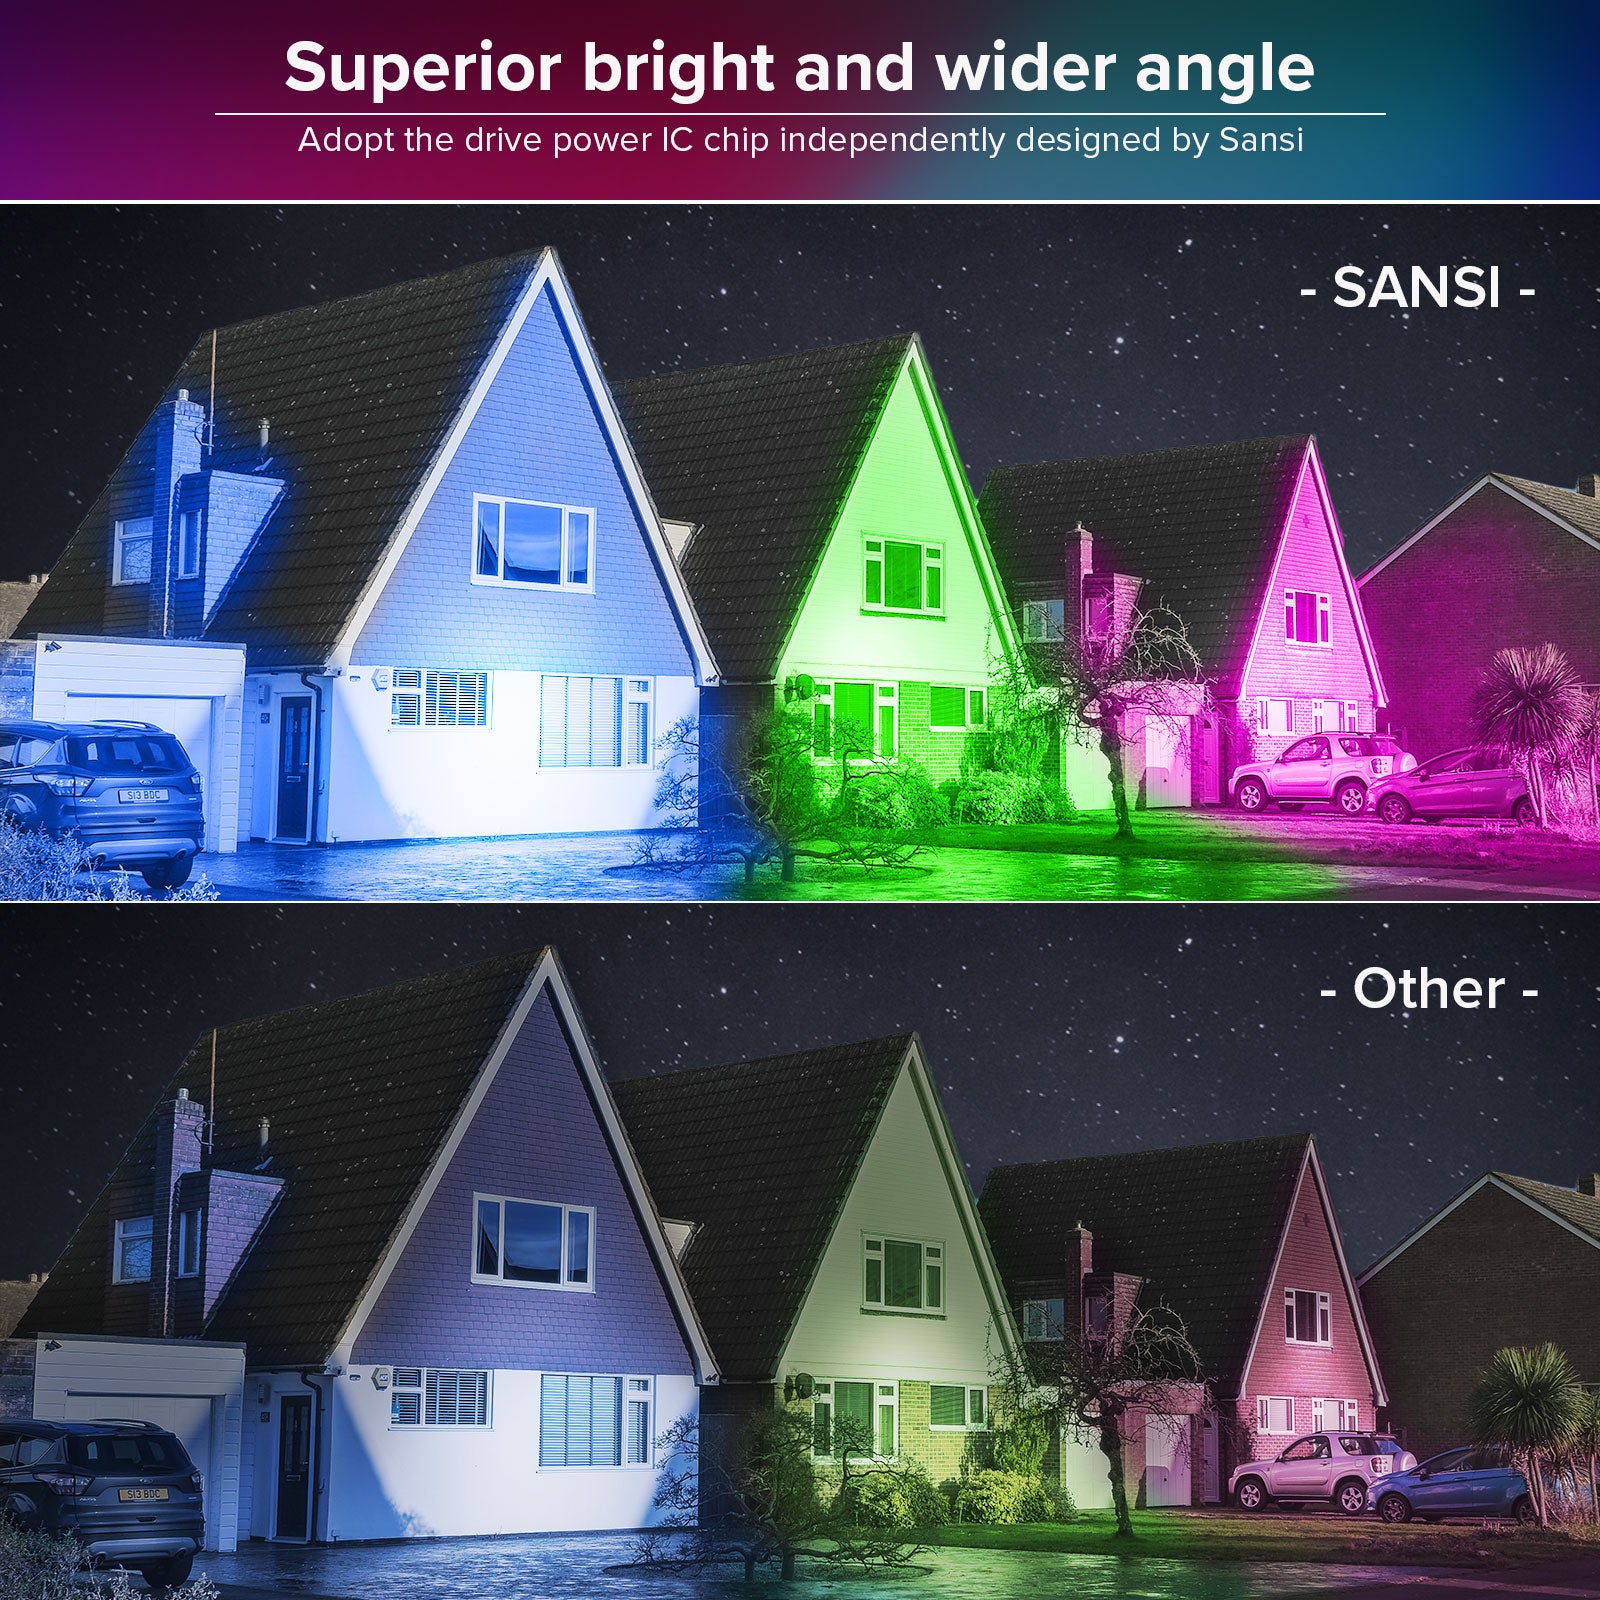 Upgraded 20W RGB LED Flood Light (US ONLY) has superior brightness and wider angle，which is adopted the drive power lC chip independently designed by SANSI.